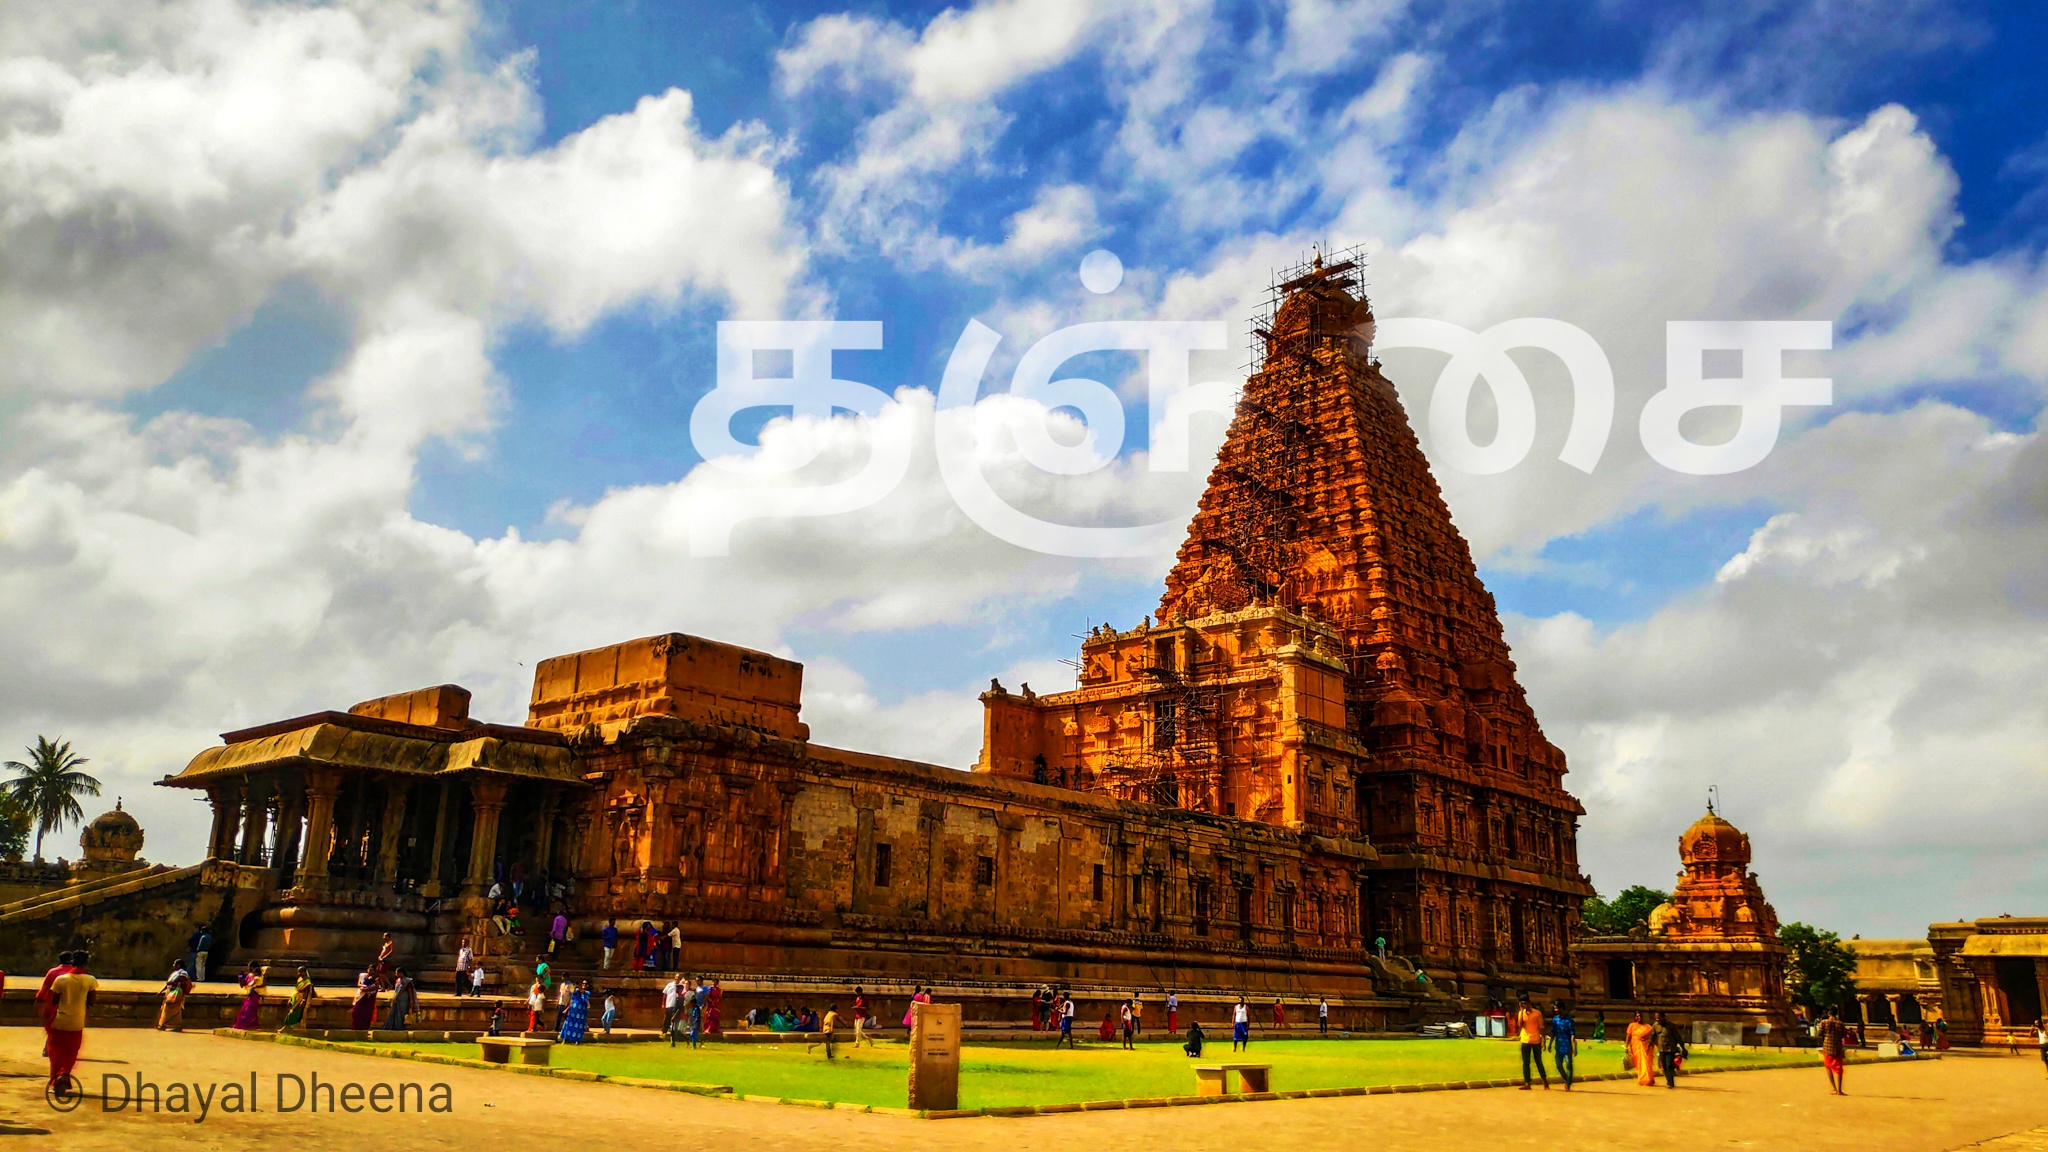 Local Guides Connect - Brihadeeswara Temple - Local Guides Connect